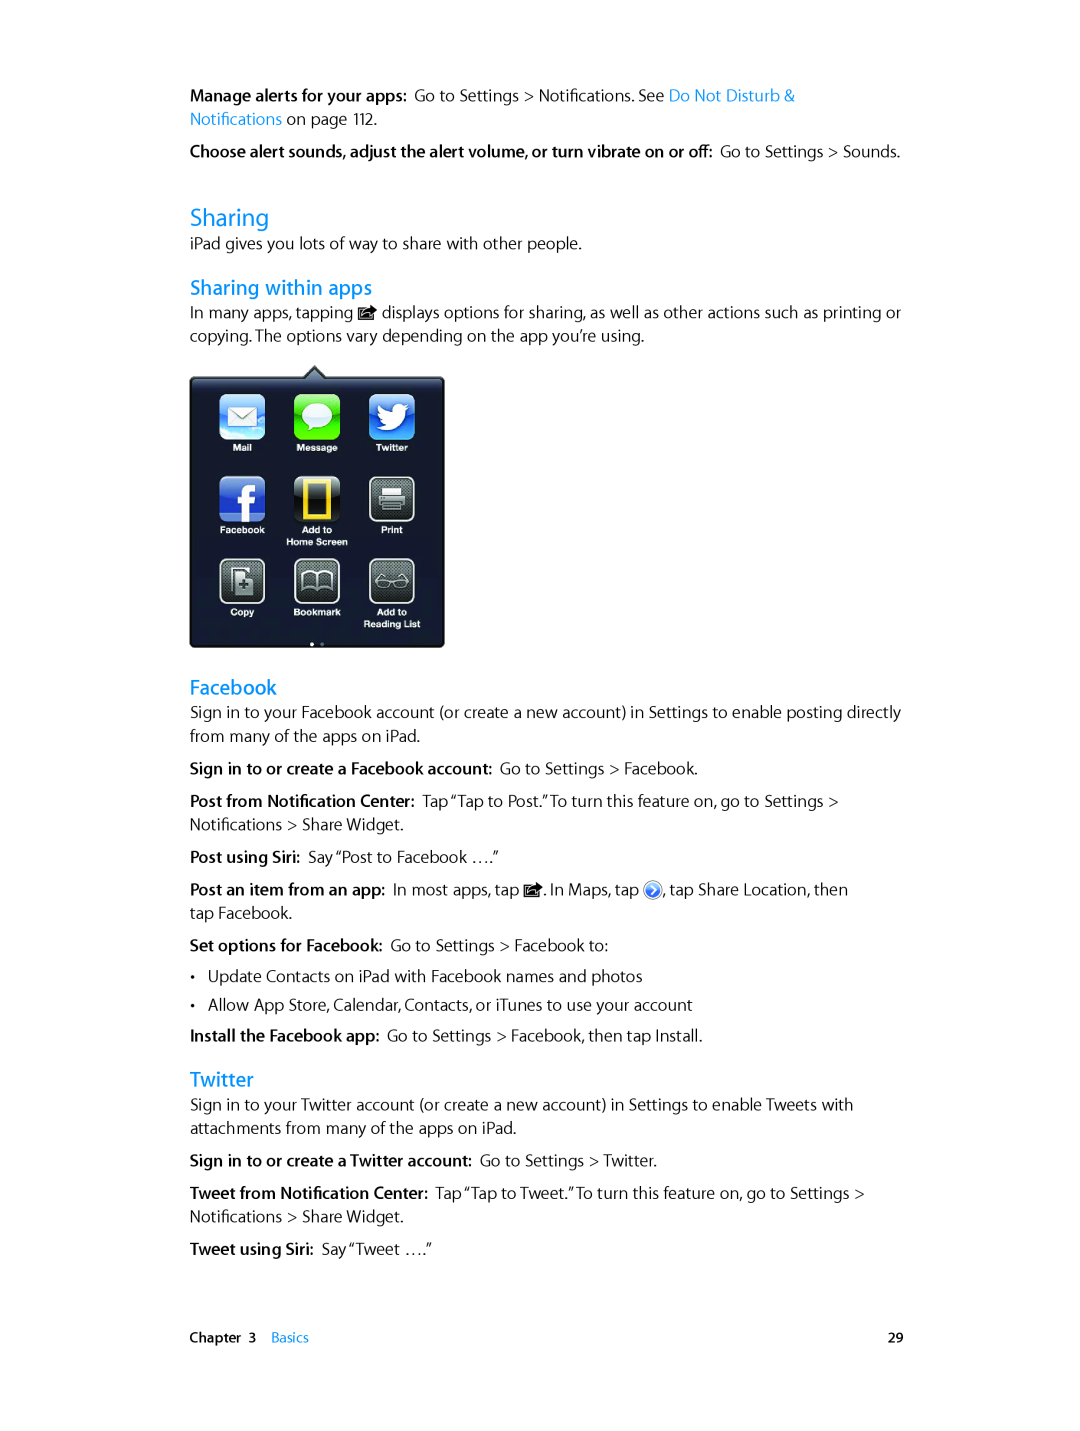 Apple MD531LL/A manual Sharing within apps, Facebook, Sign in to or create a Twitter account Go to Settings Twitter 